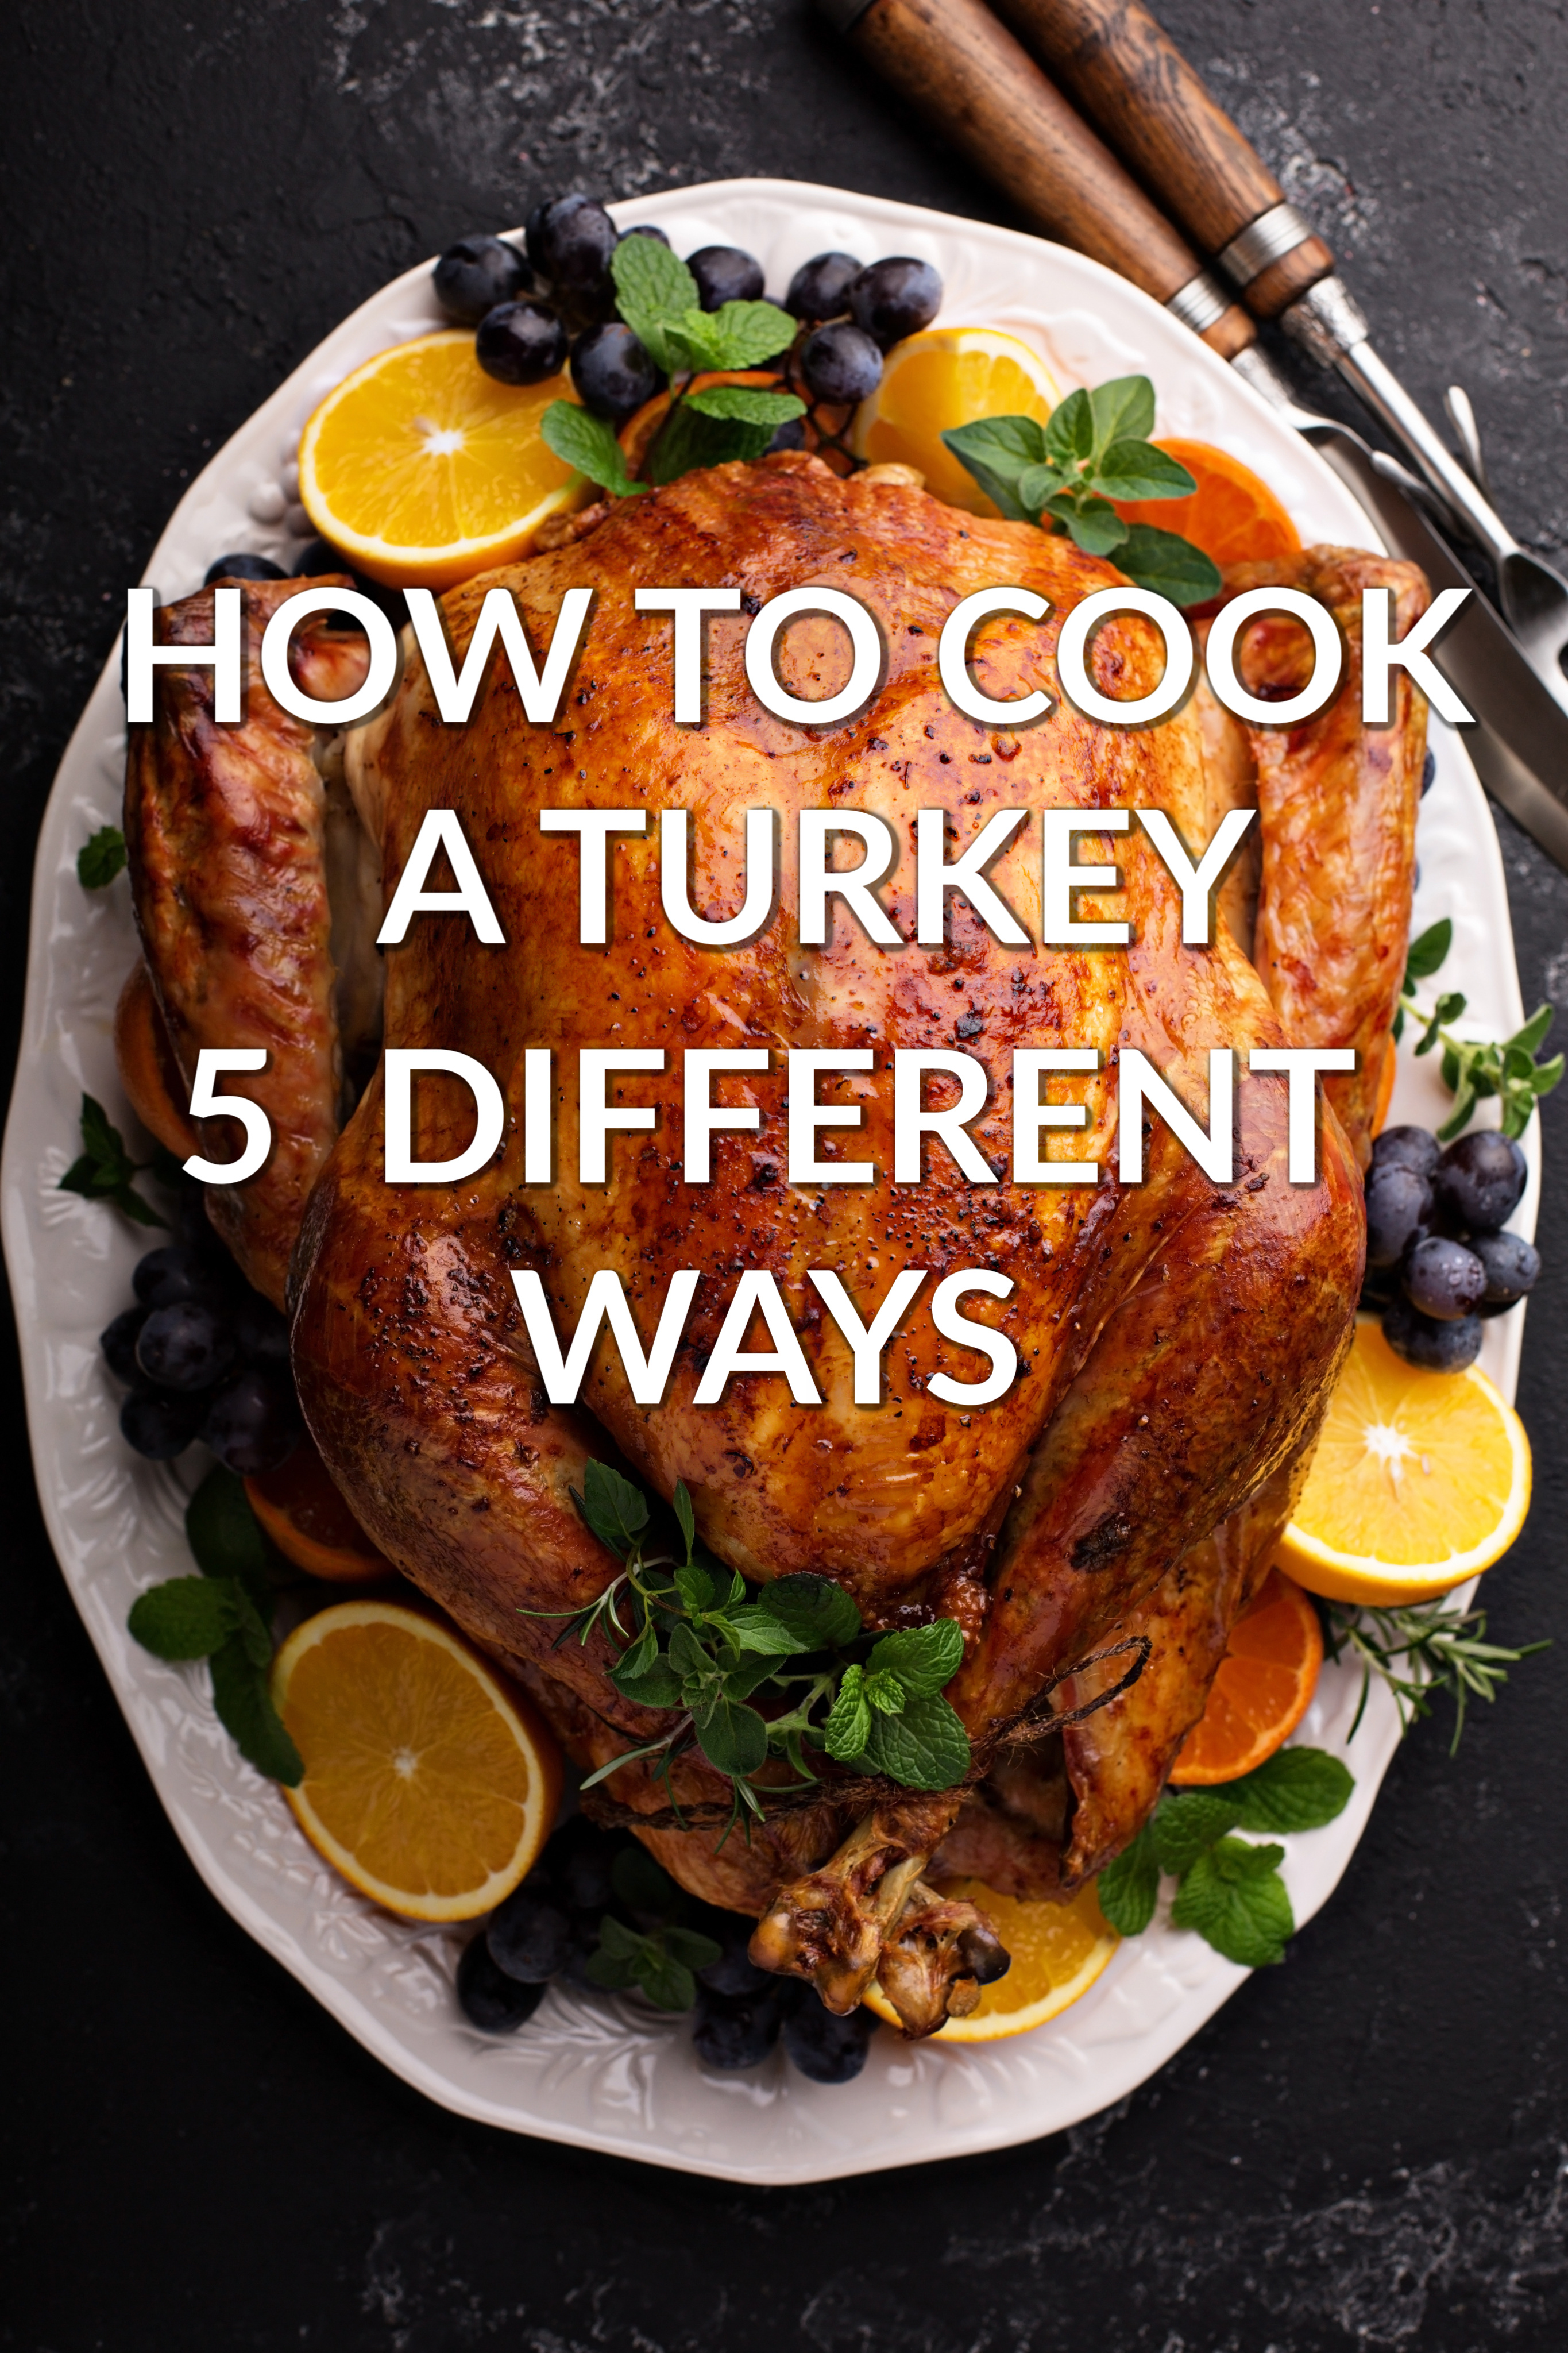 How To Cook a Turkey (5 Different Ways)
